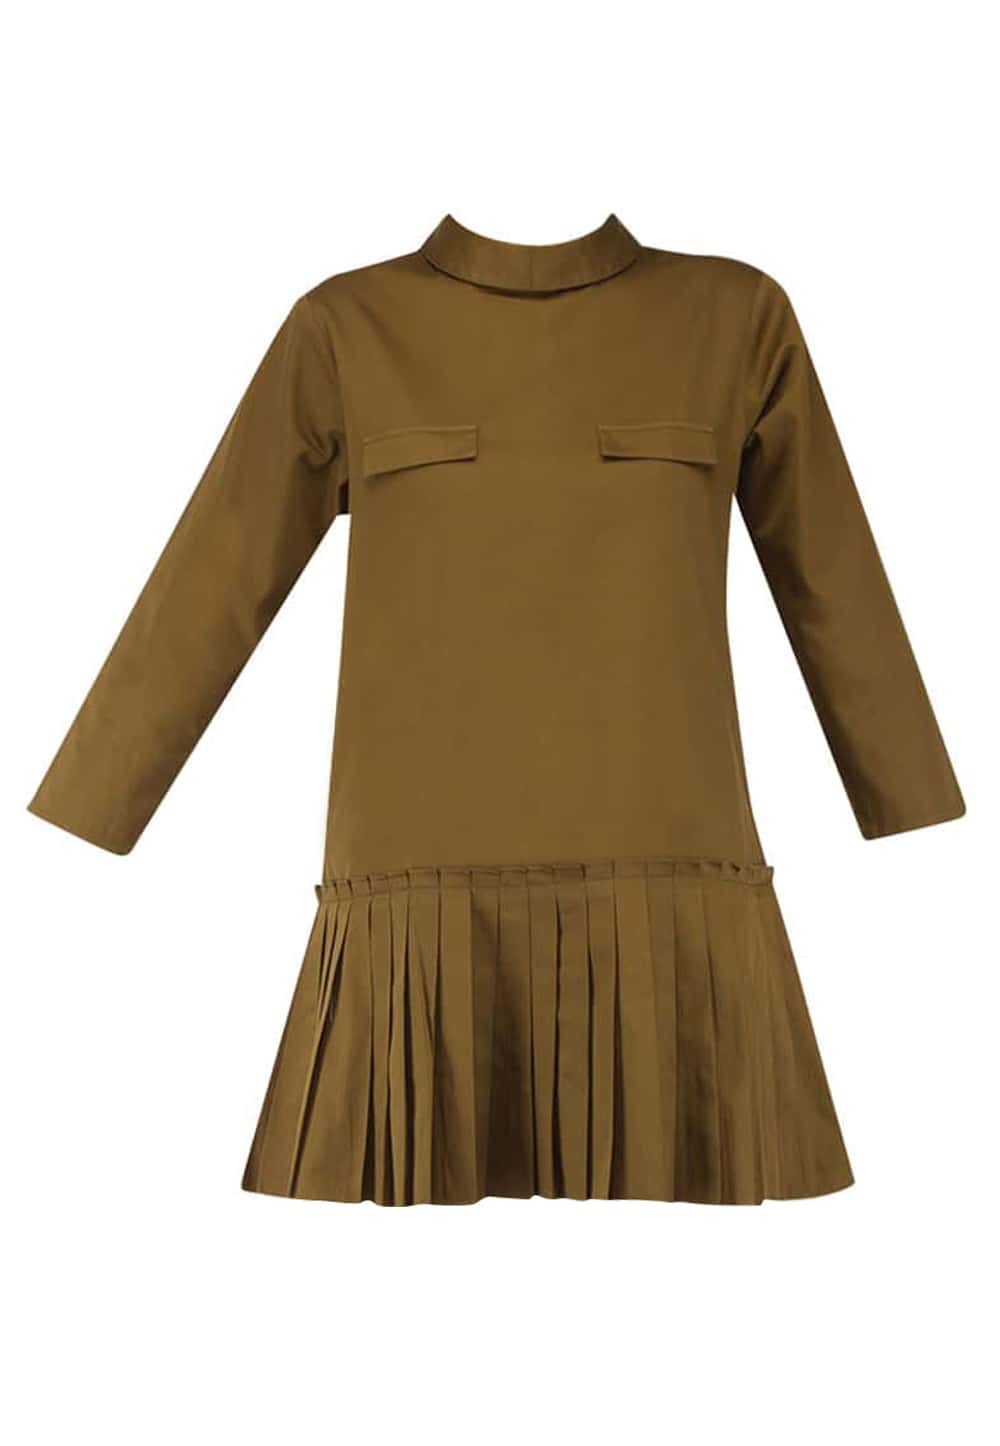 Military green pleated dress available only at IBFW